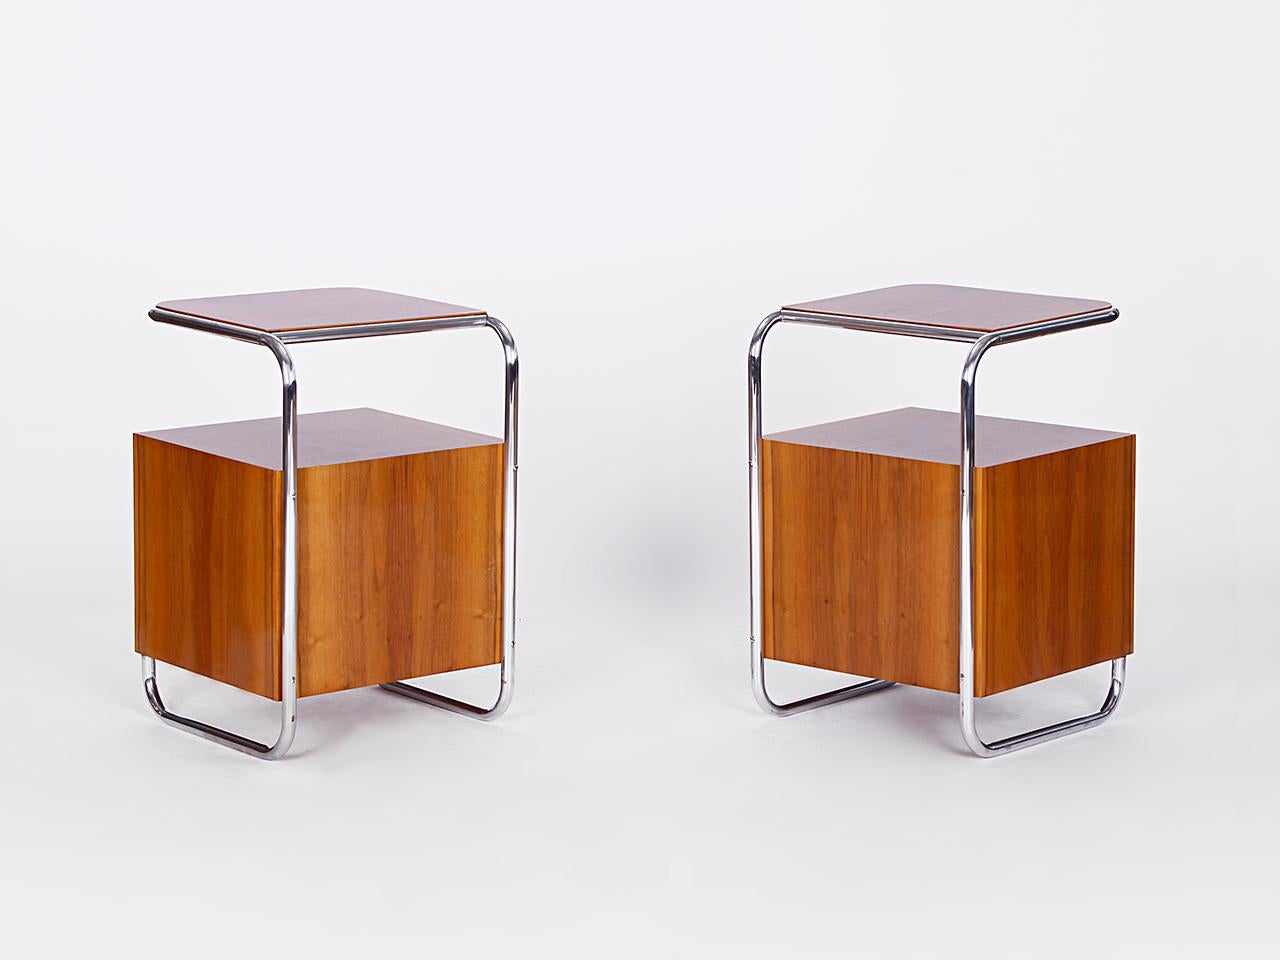 Art Deco Veneered Walnut Chrome and Tubular Steel Sideboards  Vichr, Set of 2 In Excellent Condition For Sale In Wien, AT